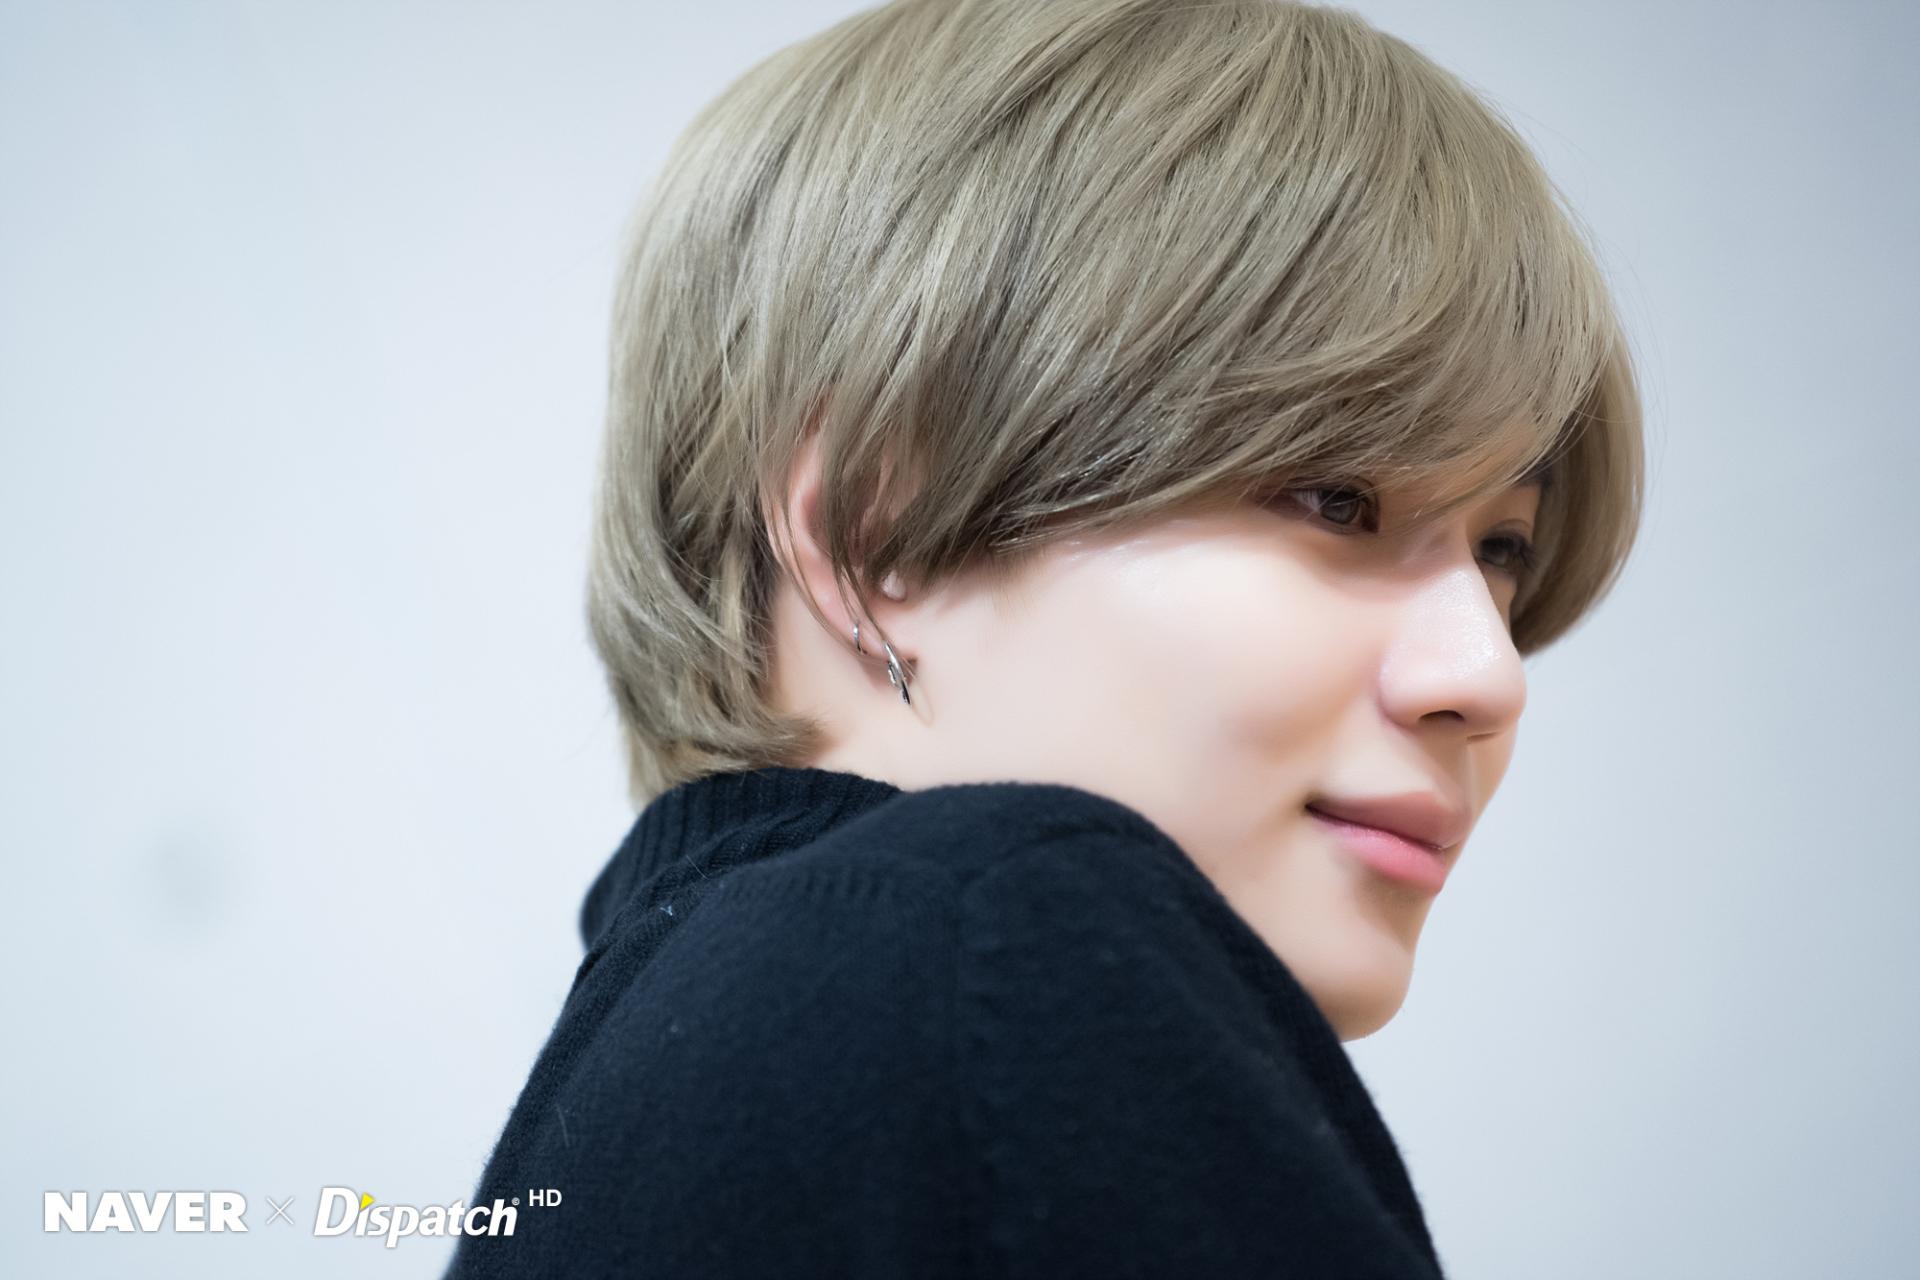 Lee Taemin Image HD Wallpaper And Background Naver X